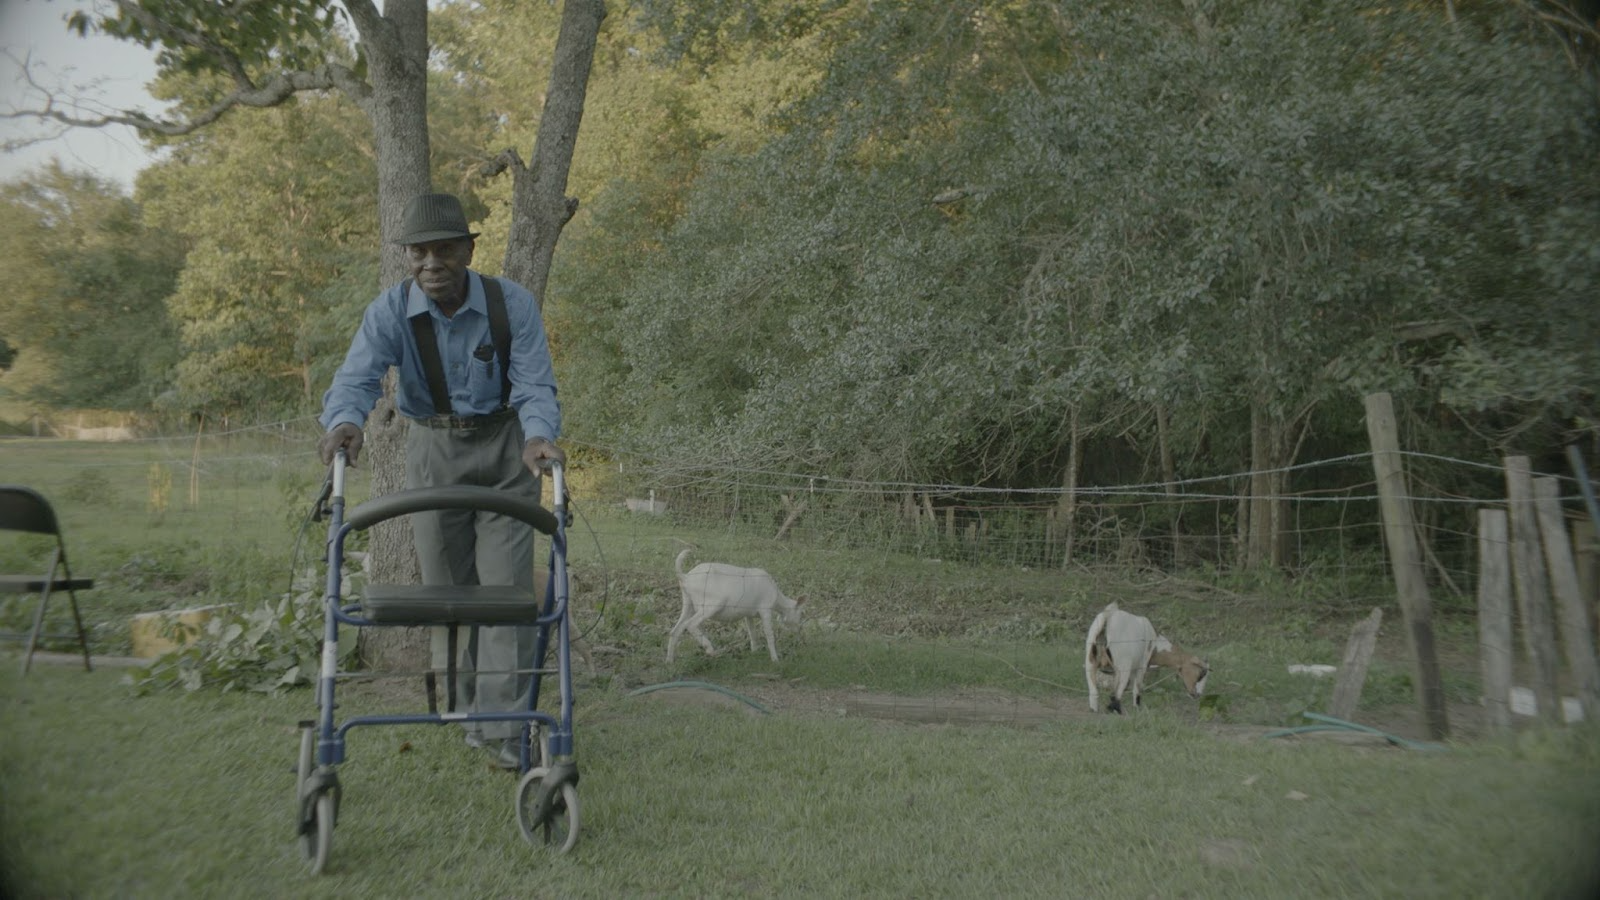 A black older man wearing a light blue long sleeved shirt and green pants pushes a walker in a field with two white goats grazing along a wire fence.